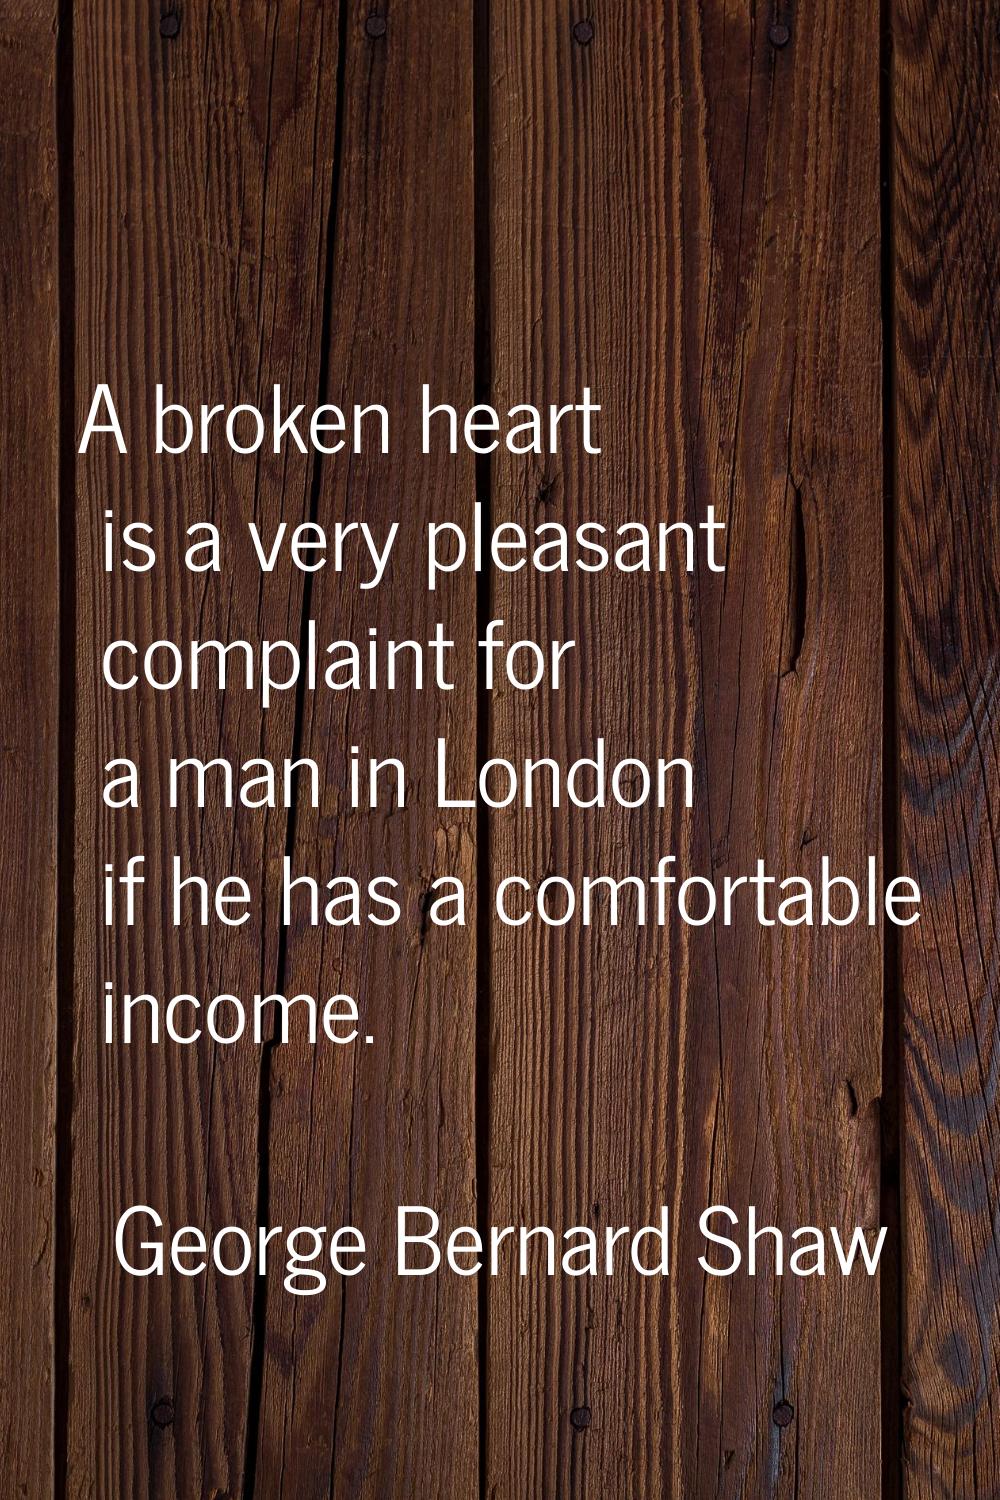 A broken heart is a very pleasant complaint for a man in London if he has a comfortable income.